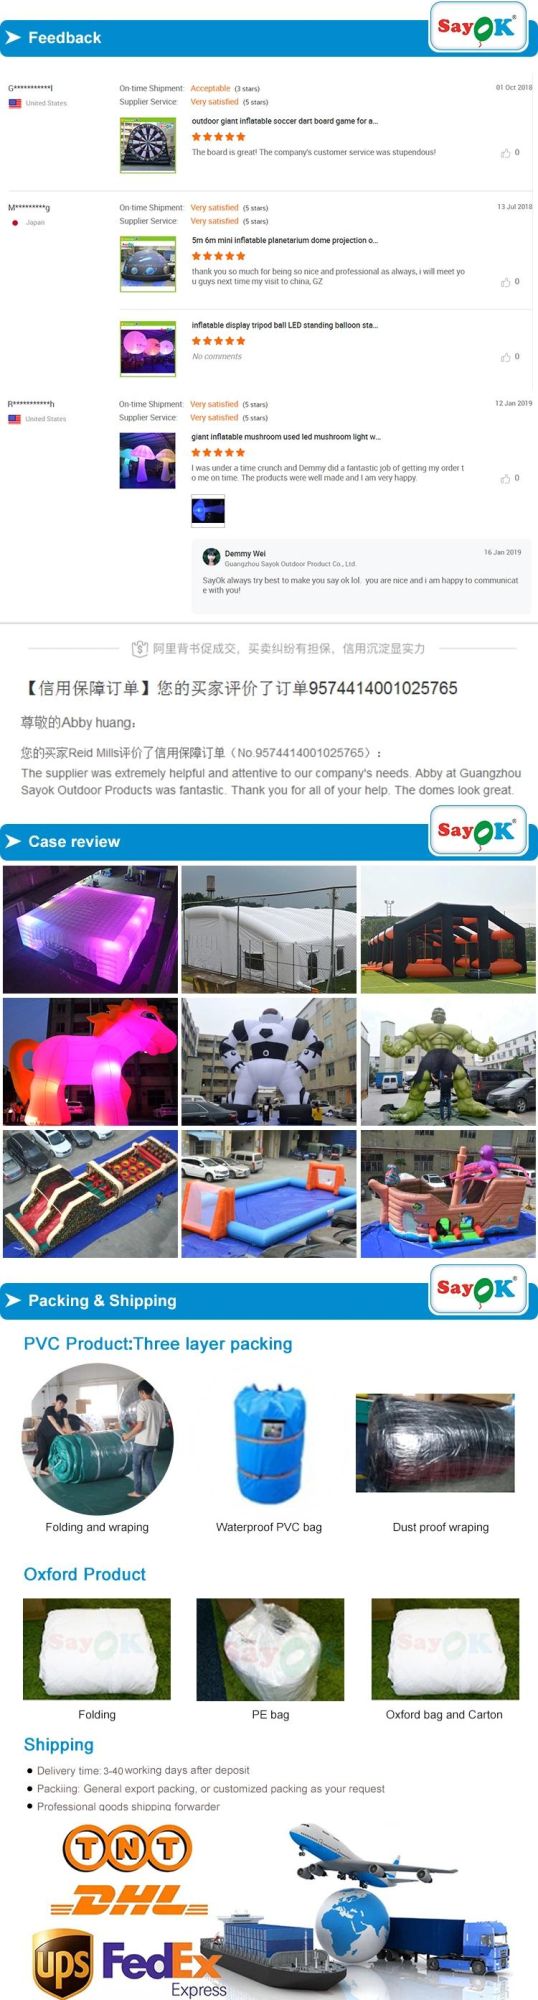 Customized Factory Price Inflatable Water Blobjumping Pillow